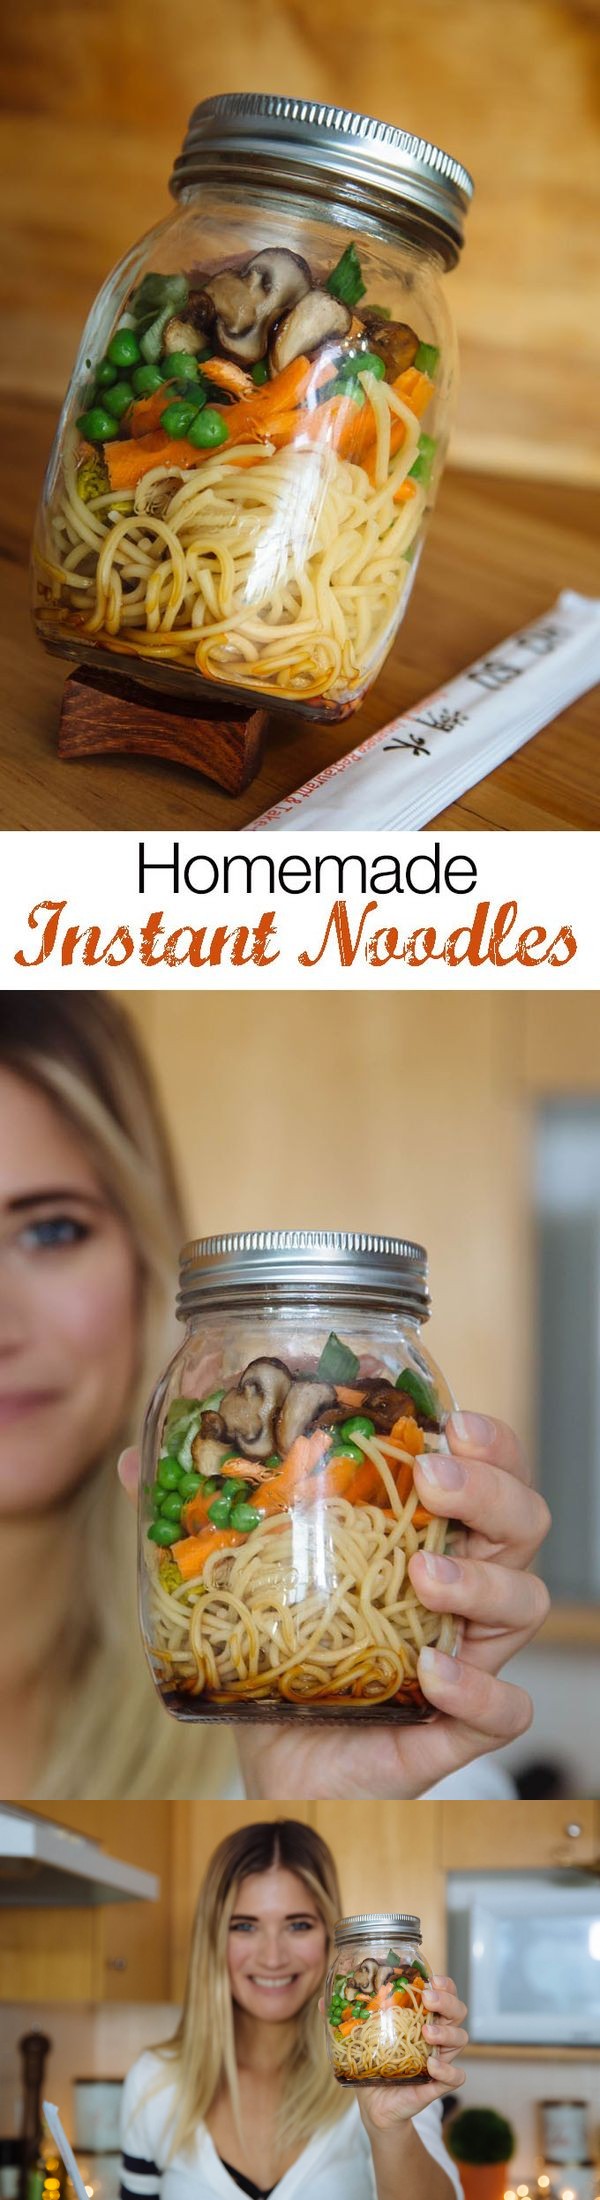 How to Make Homemade Instant Noodles